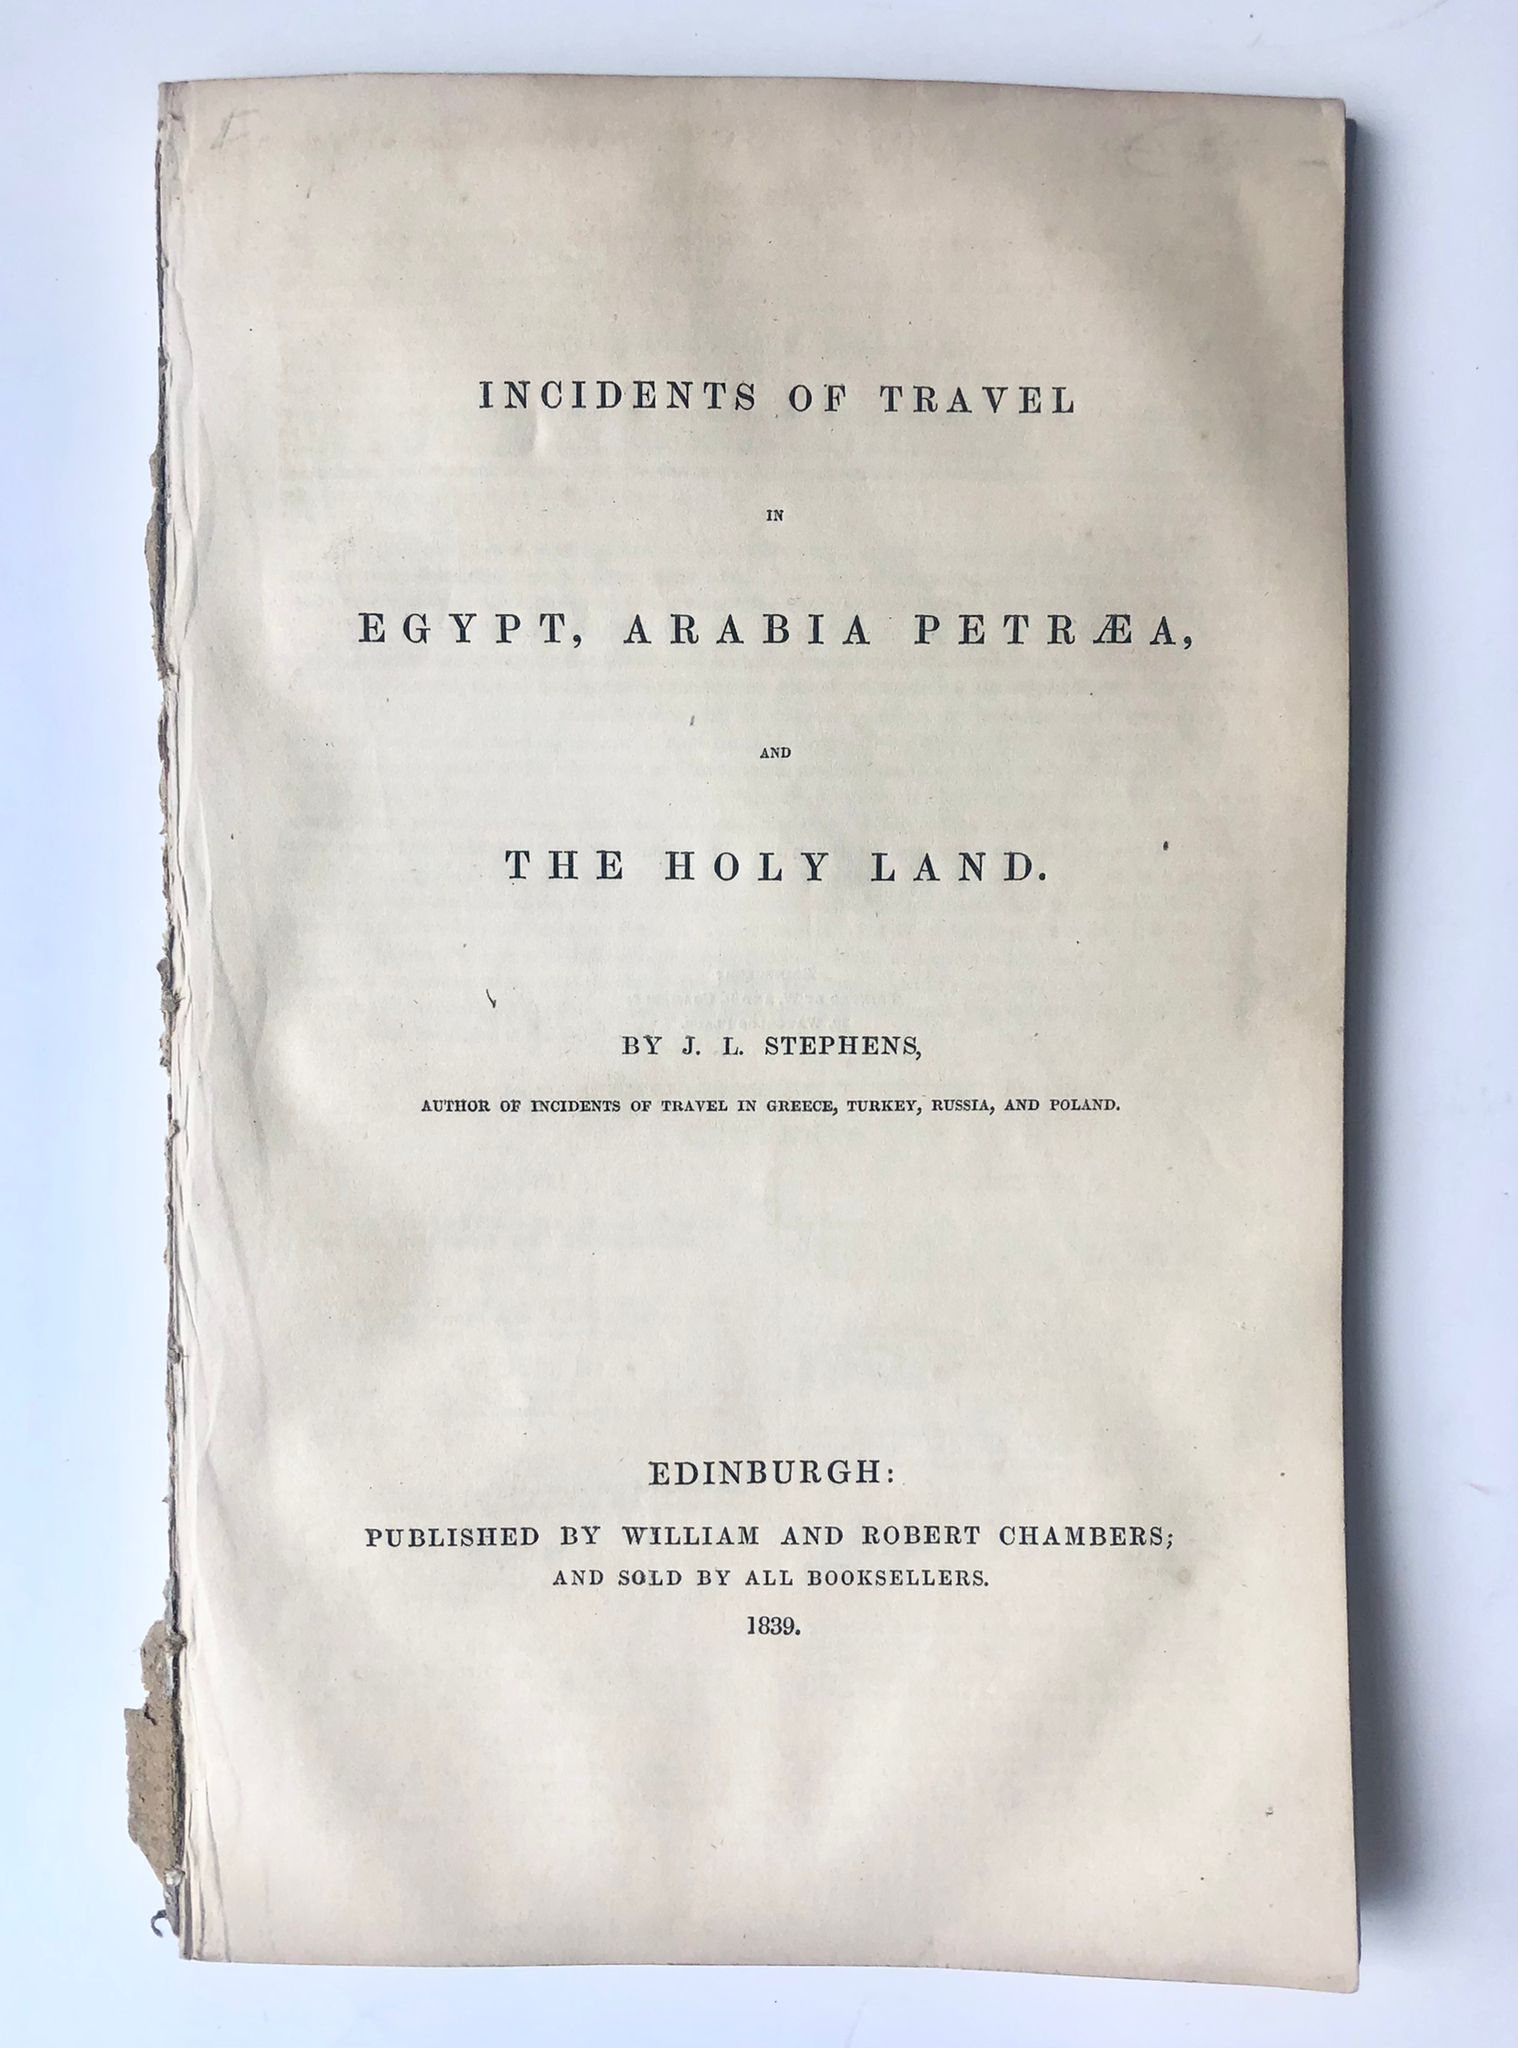 [Middle-East, Egypte, 1839] Incidents of travel in Egypt, Arabia petræa, and the Holy Land, By J. L. Stephens, Published by William and Robert Chambers, Edinburgh, 1839, Egypte, Israël e.a., 120 pp.